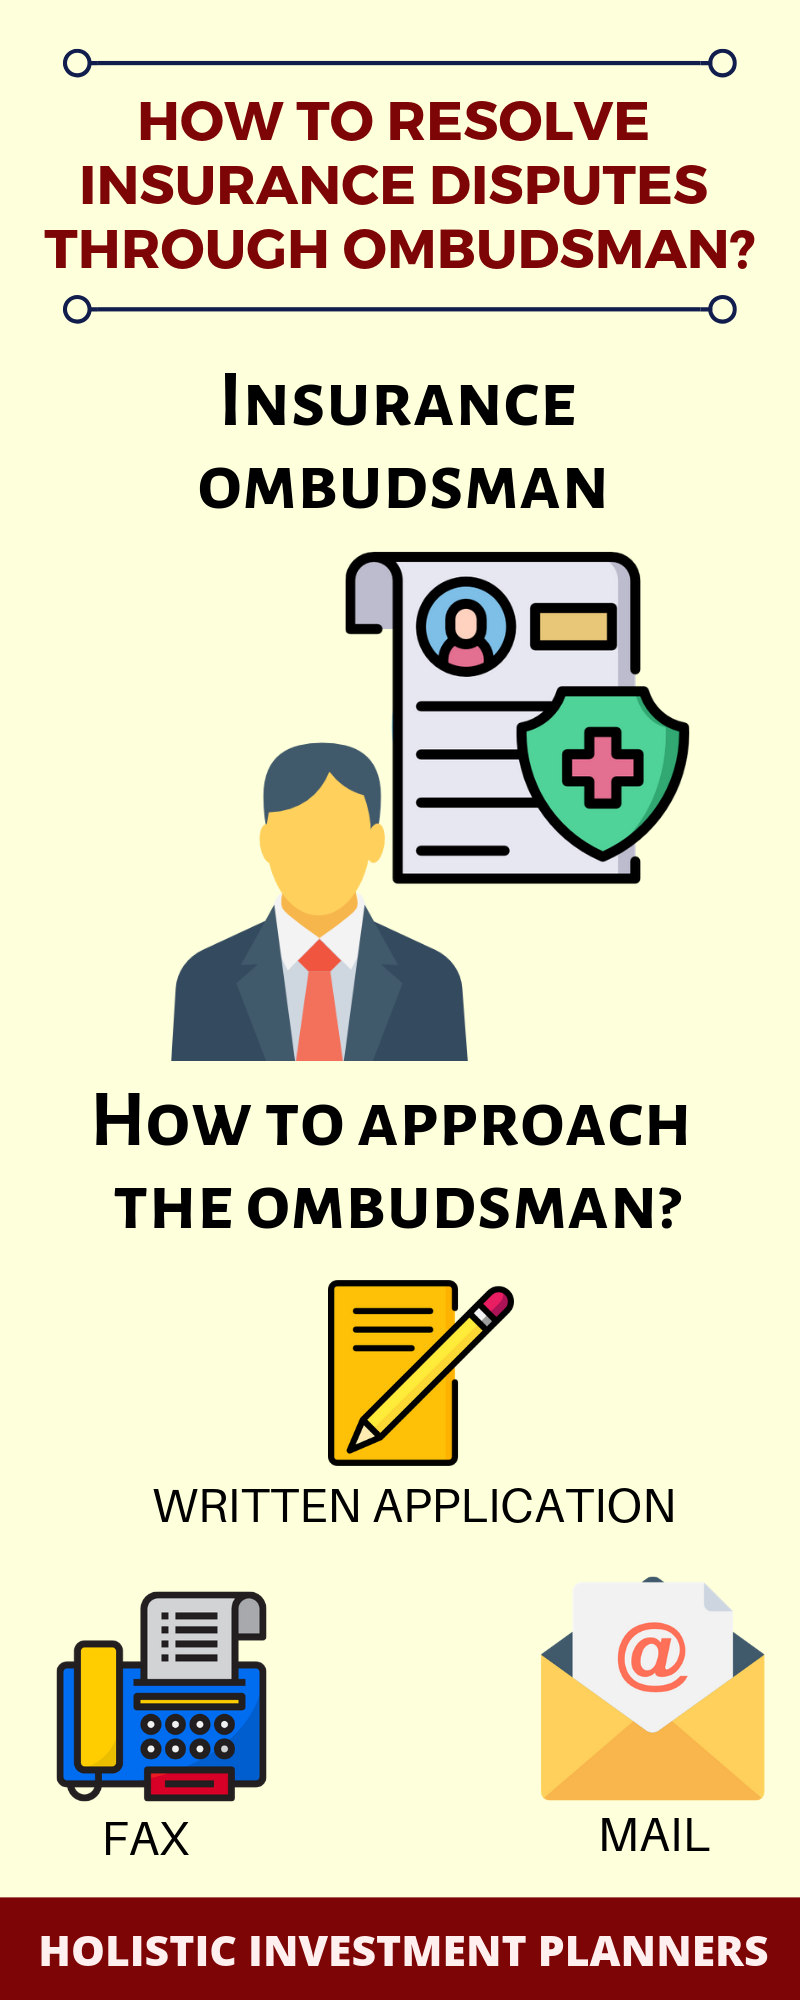 Insurance Ombudsman: A Guide to Resolving Insurance Disputes